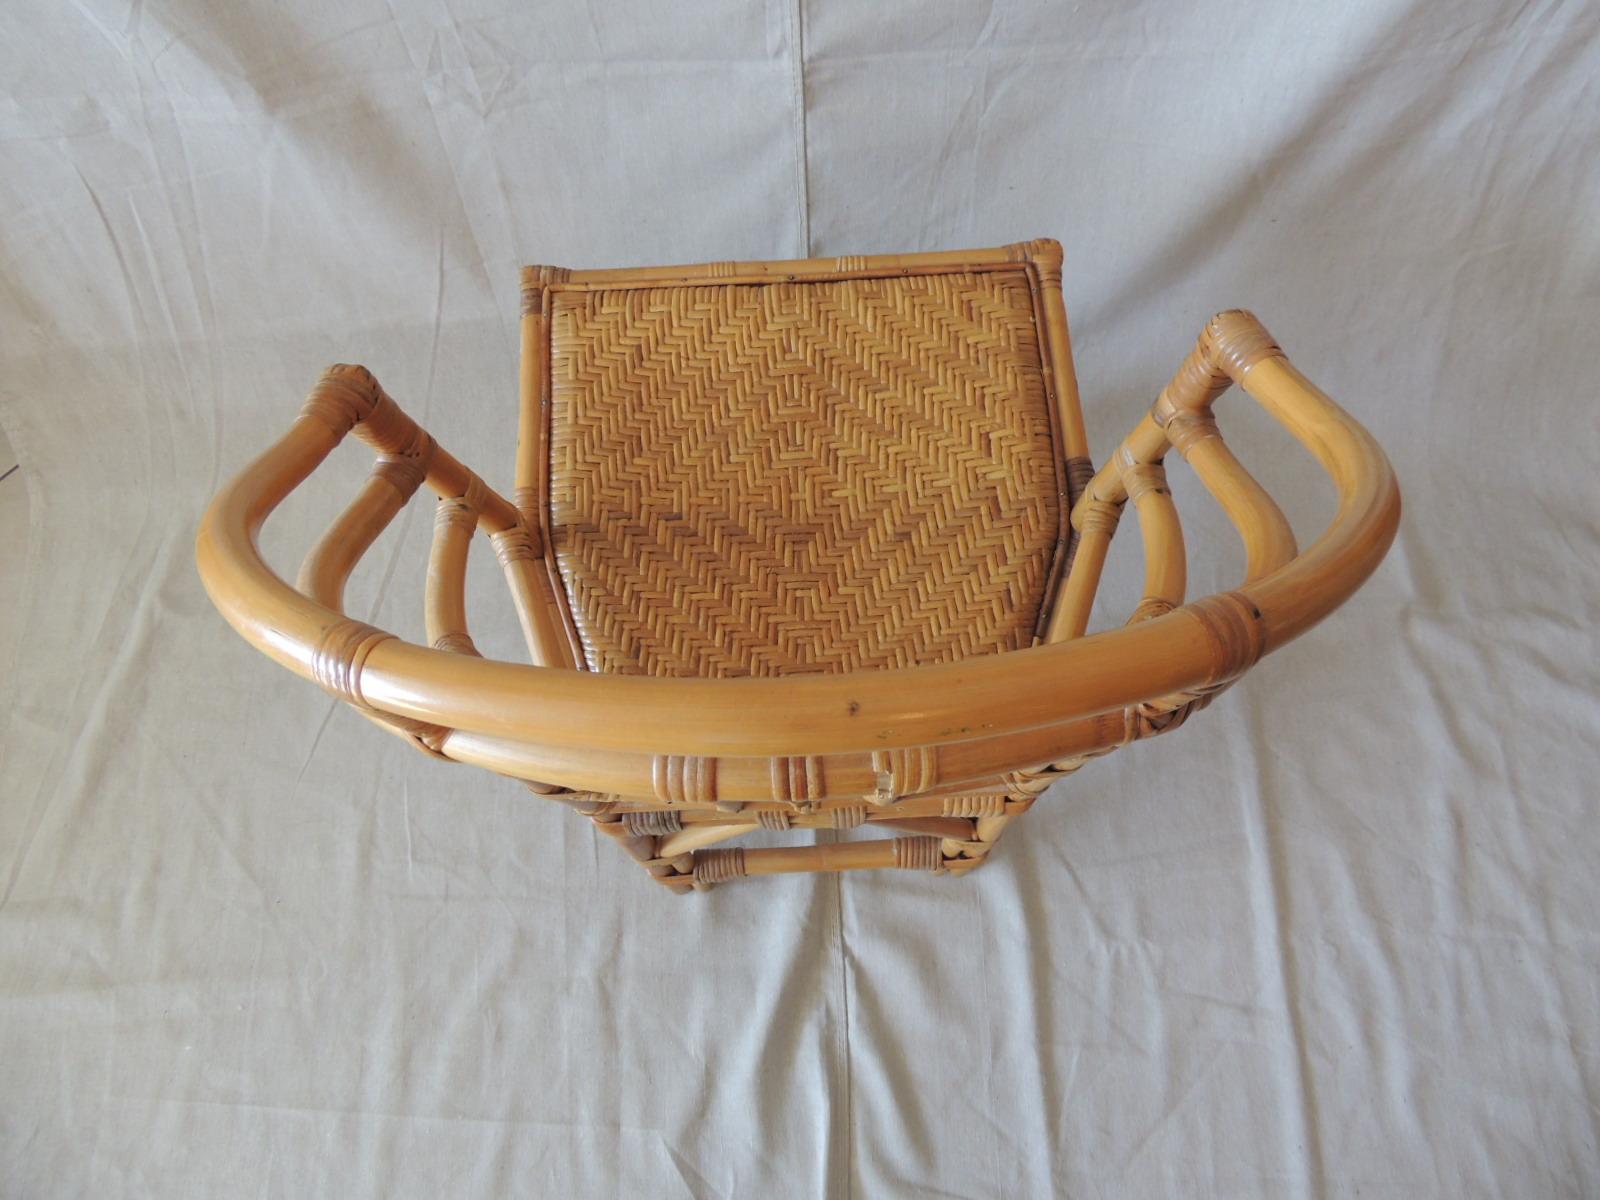 Hand-Crafted Vintage Chinese Chippindale Rattan and Wicker Arm Chair